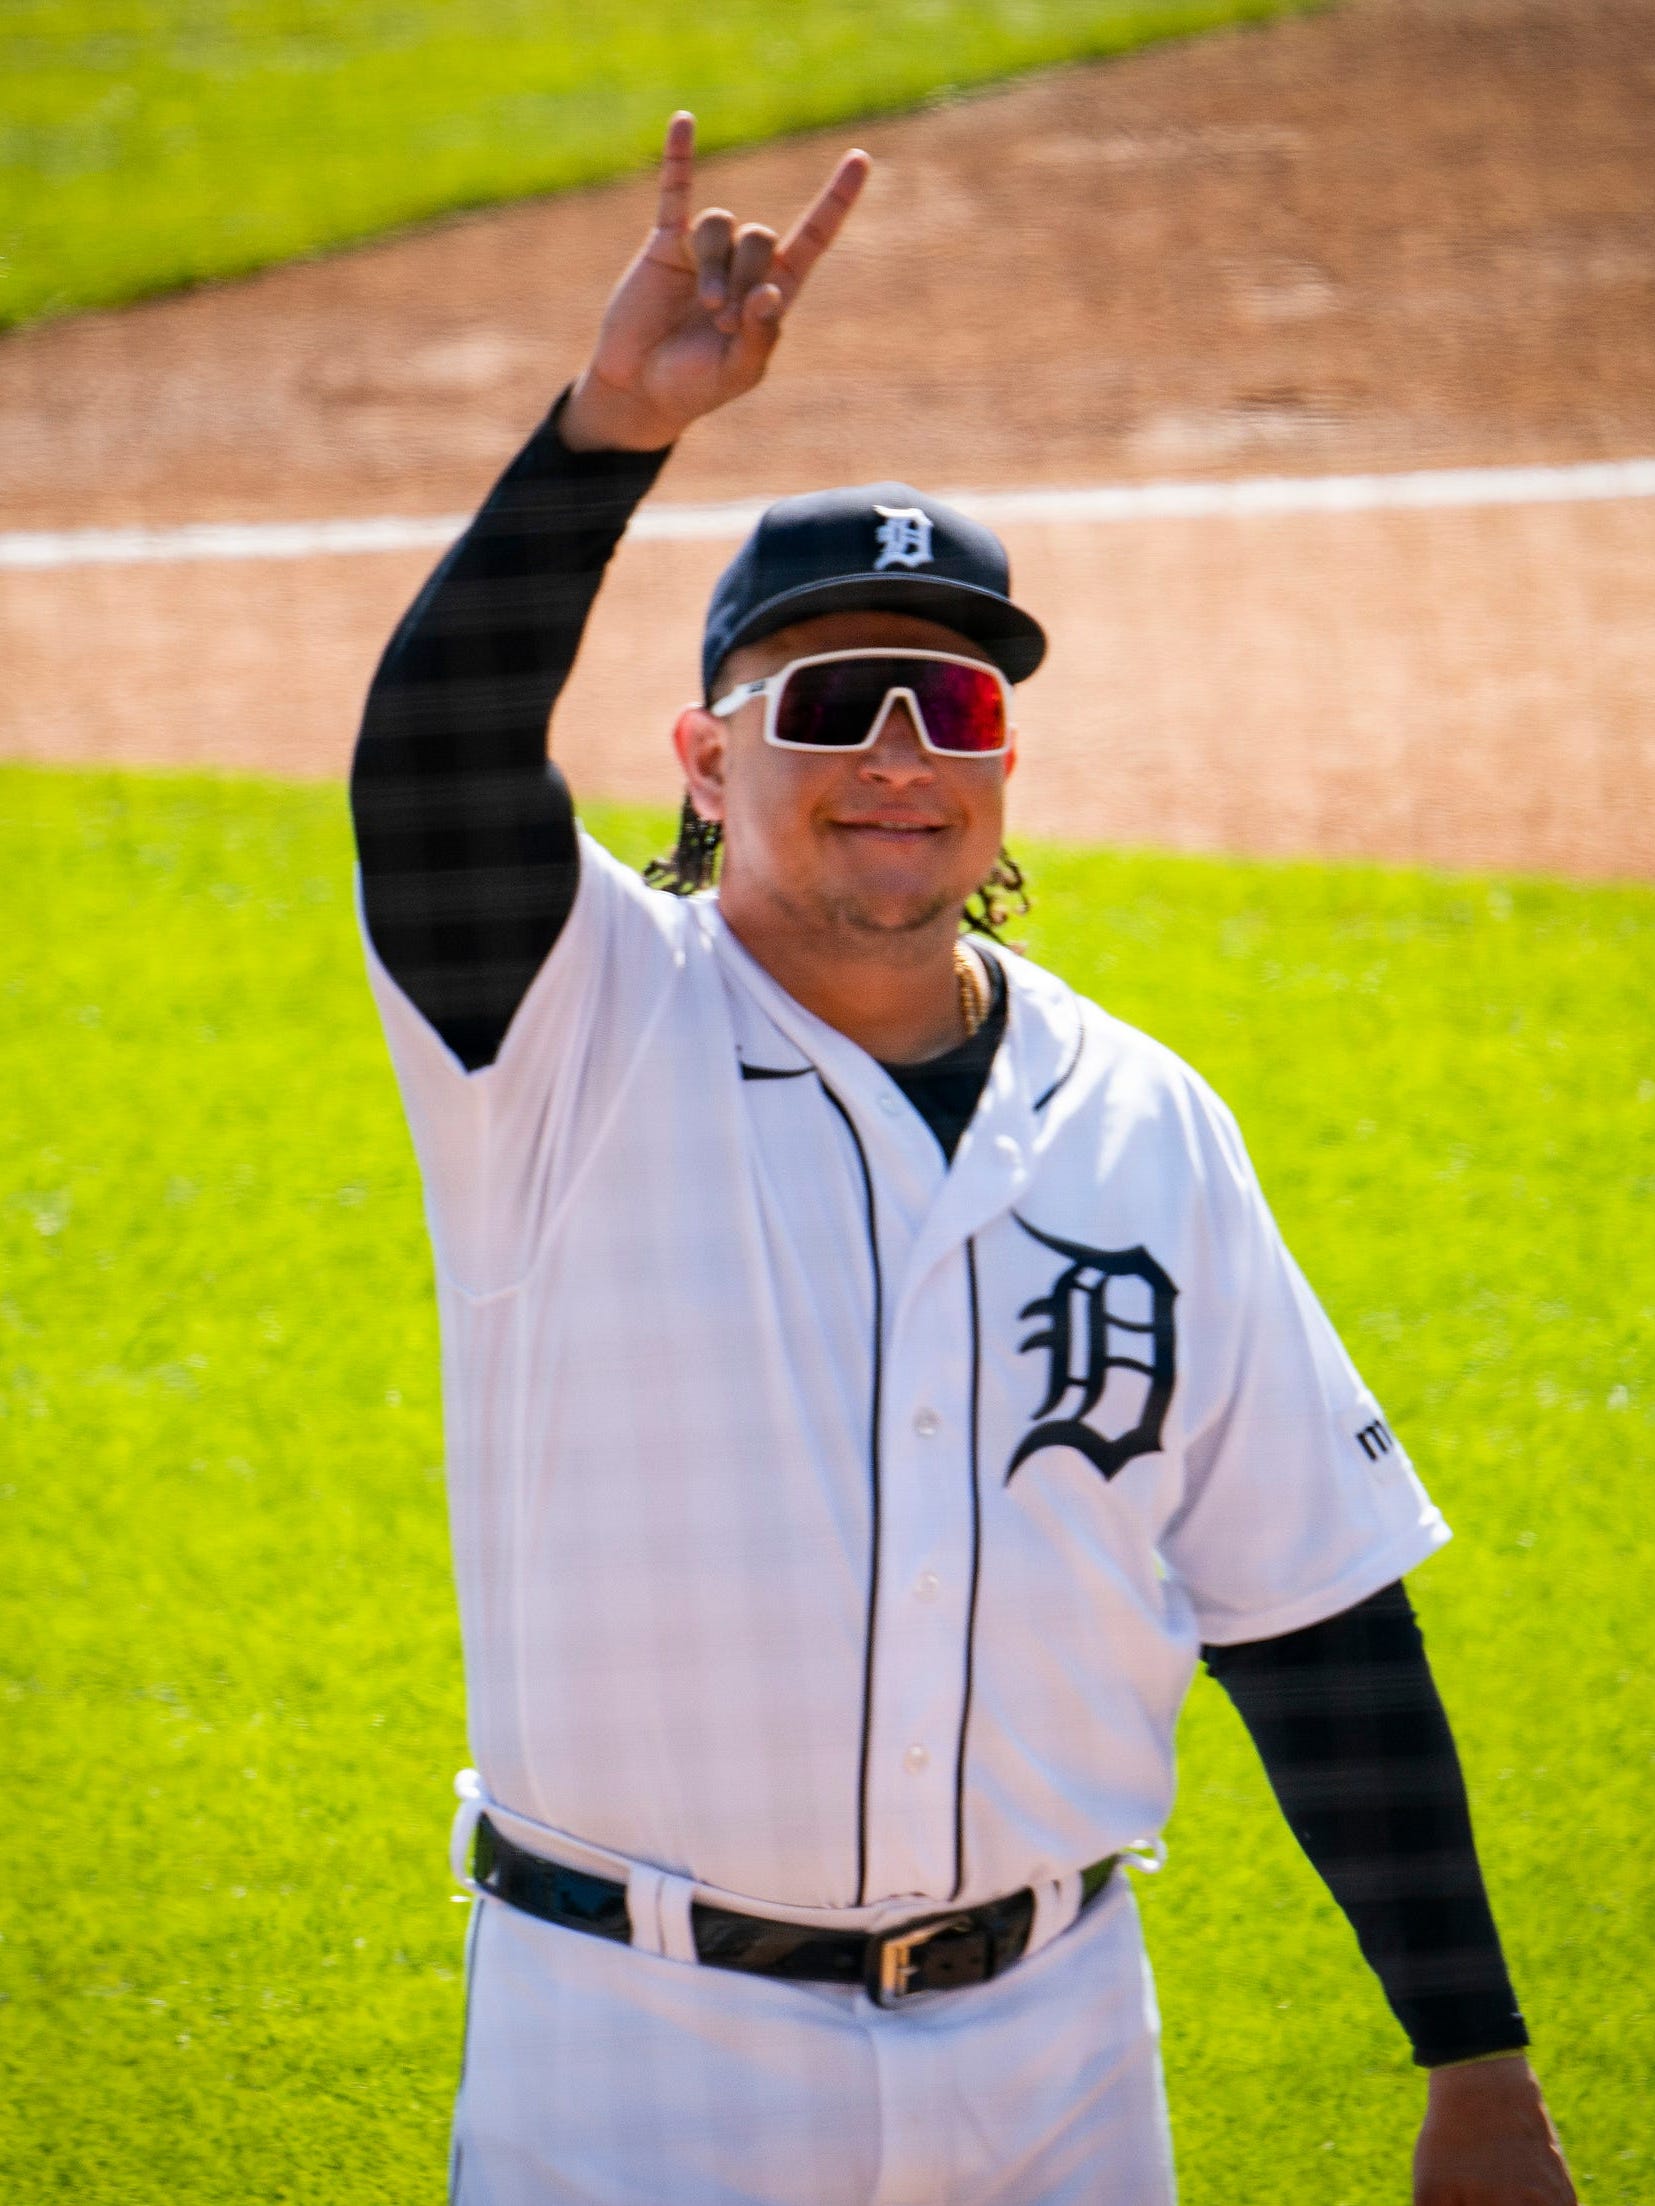 With a carefree sense of ease, Miguel Cabrera made hitting